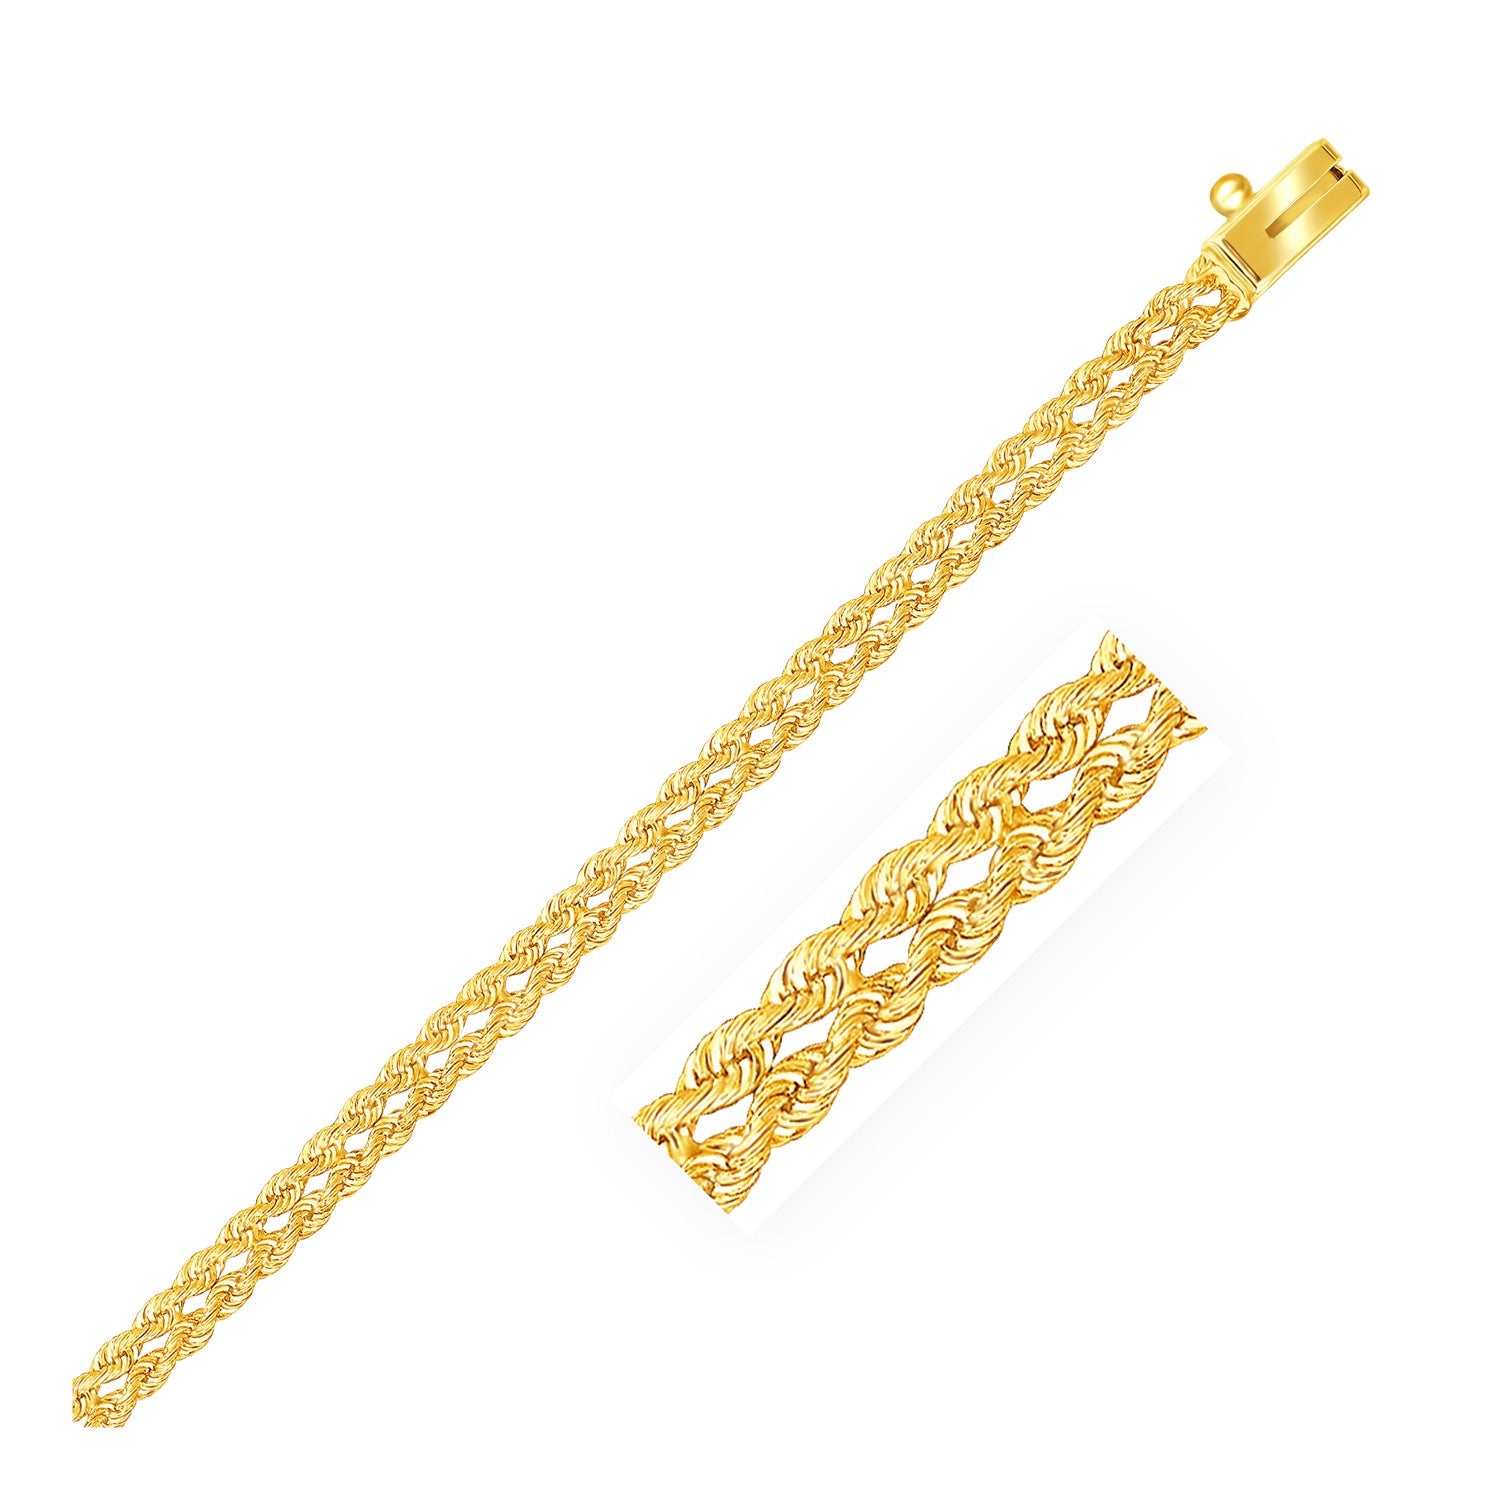 3.0 mm 14k Yellow Gold Two Row Rope Bracelet